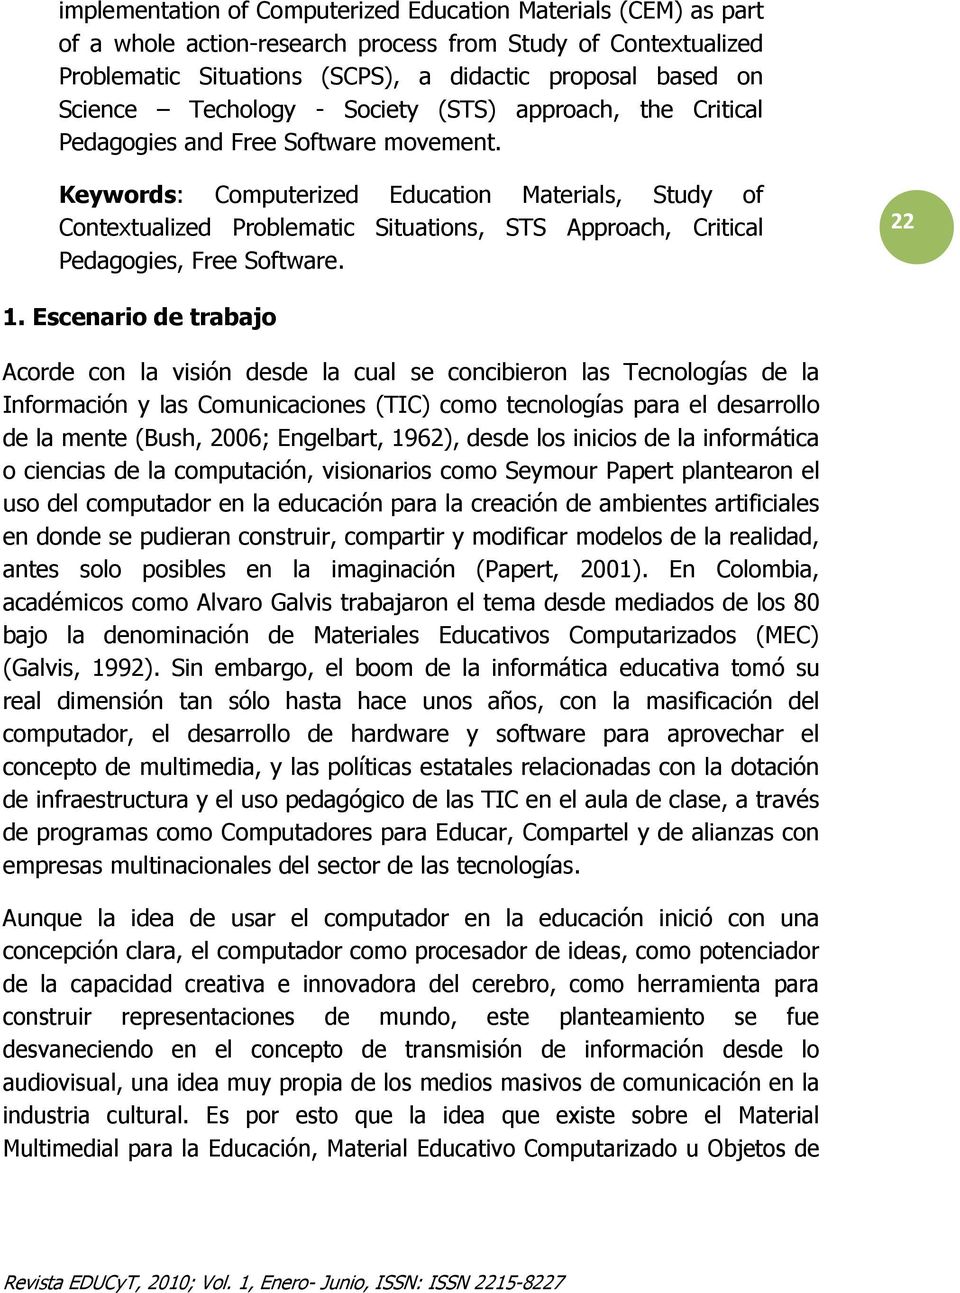 Keywords: Computerized Education Materials, Study of Contextualized Problematic Situations, STS Approach, Critical Pedagogies, Free Software. 22 1.